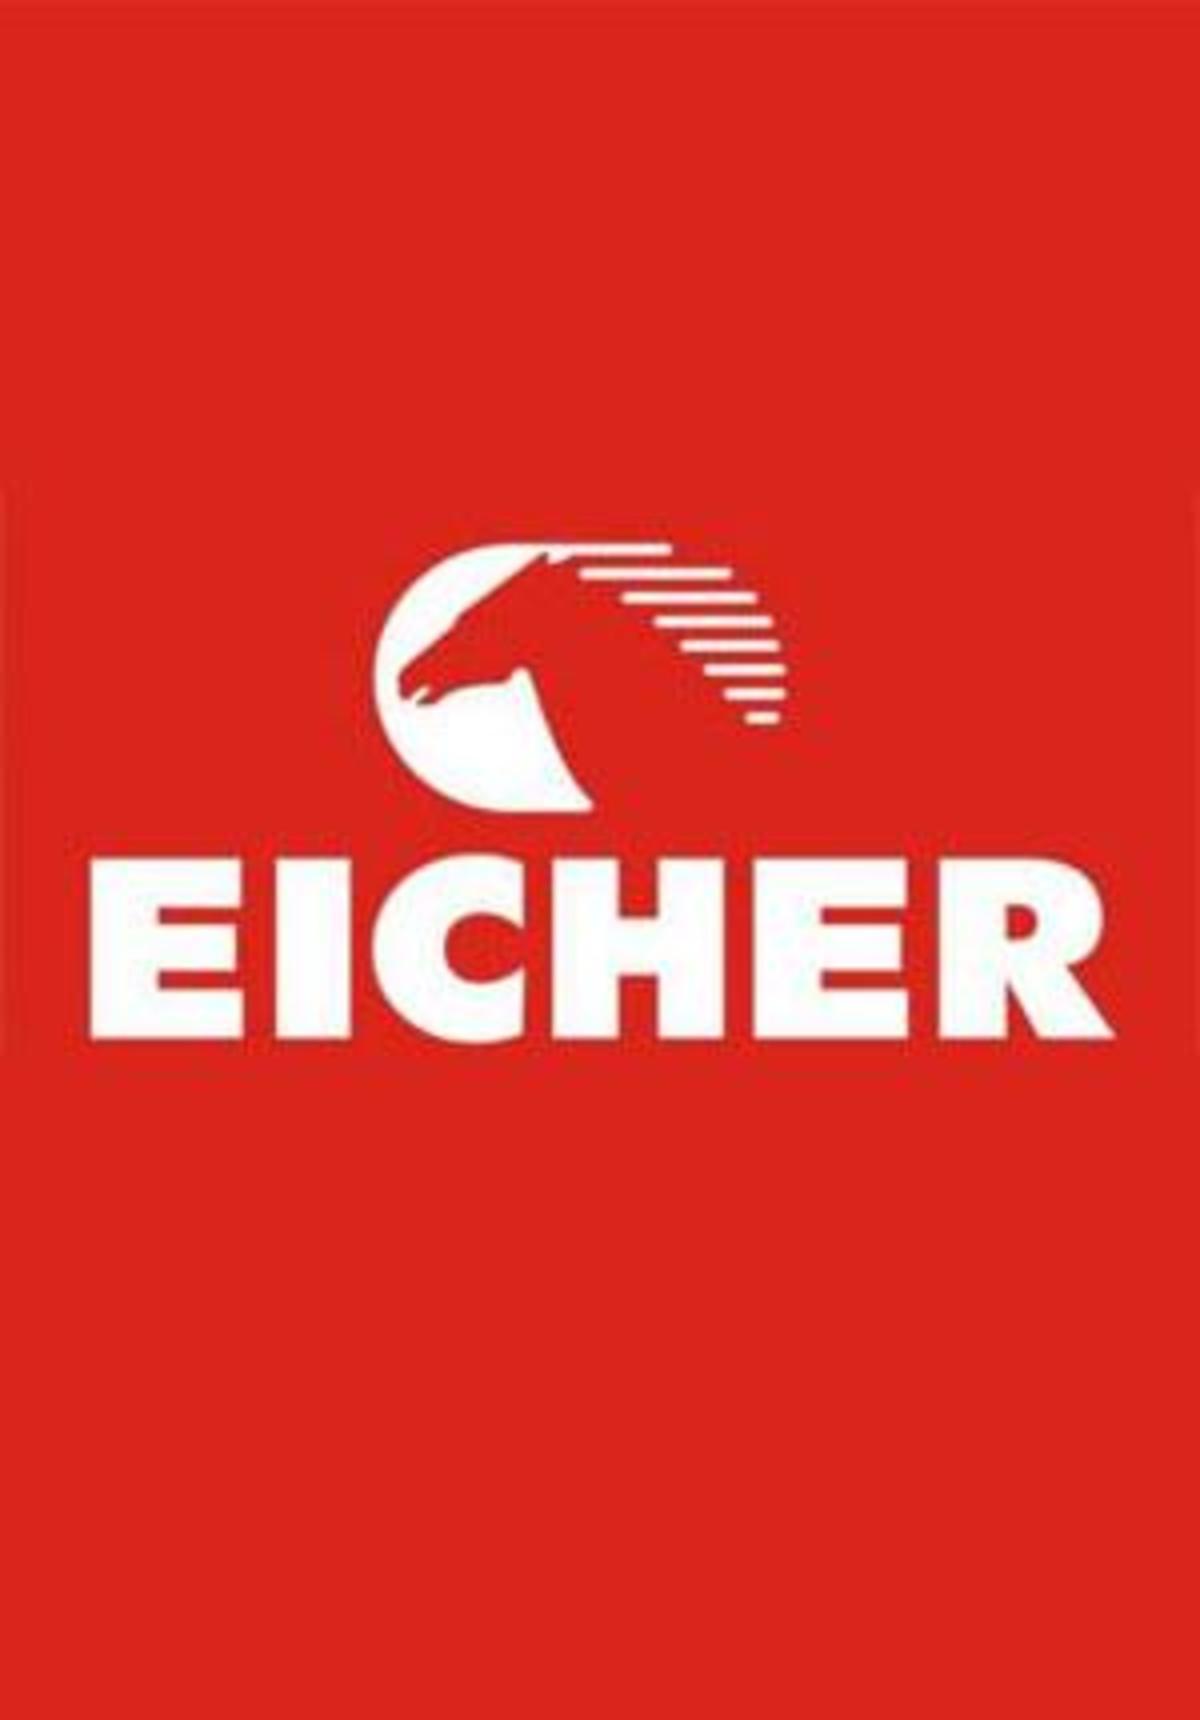 Eicher Motors Share Price Today, Live NSE/BSE, Financials & Stock Analysis